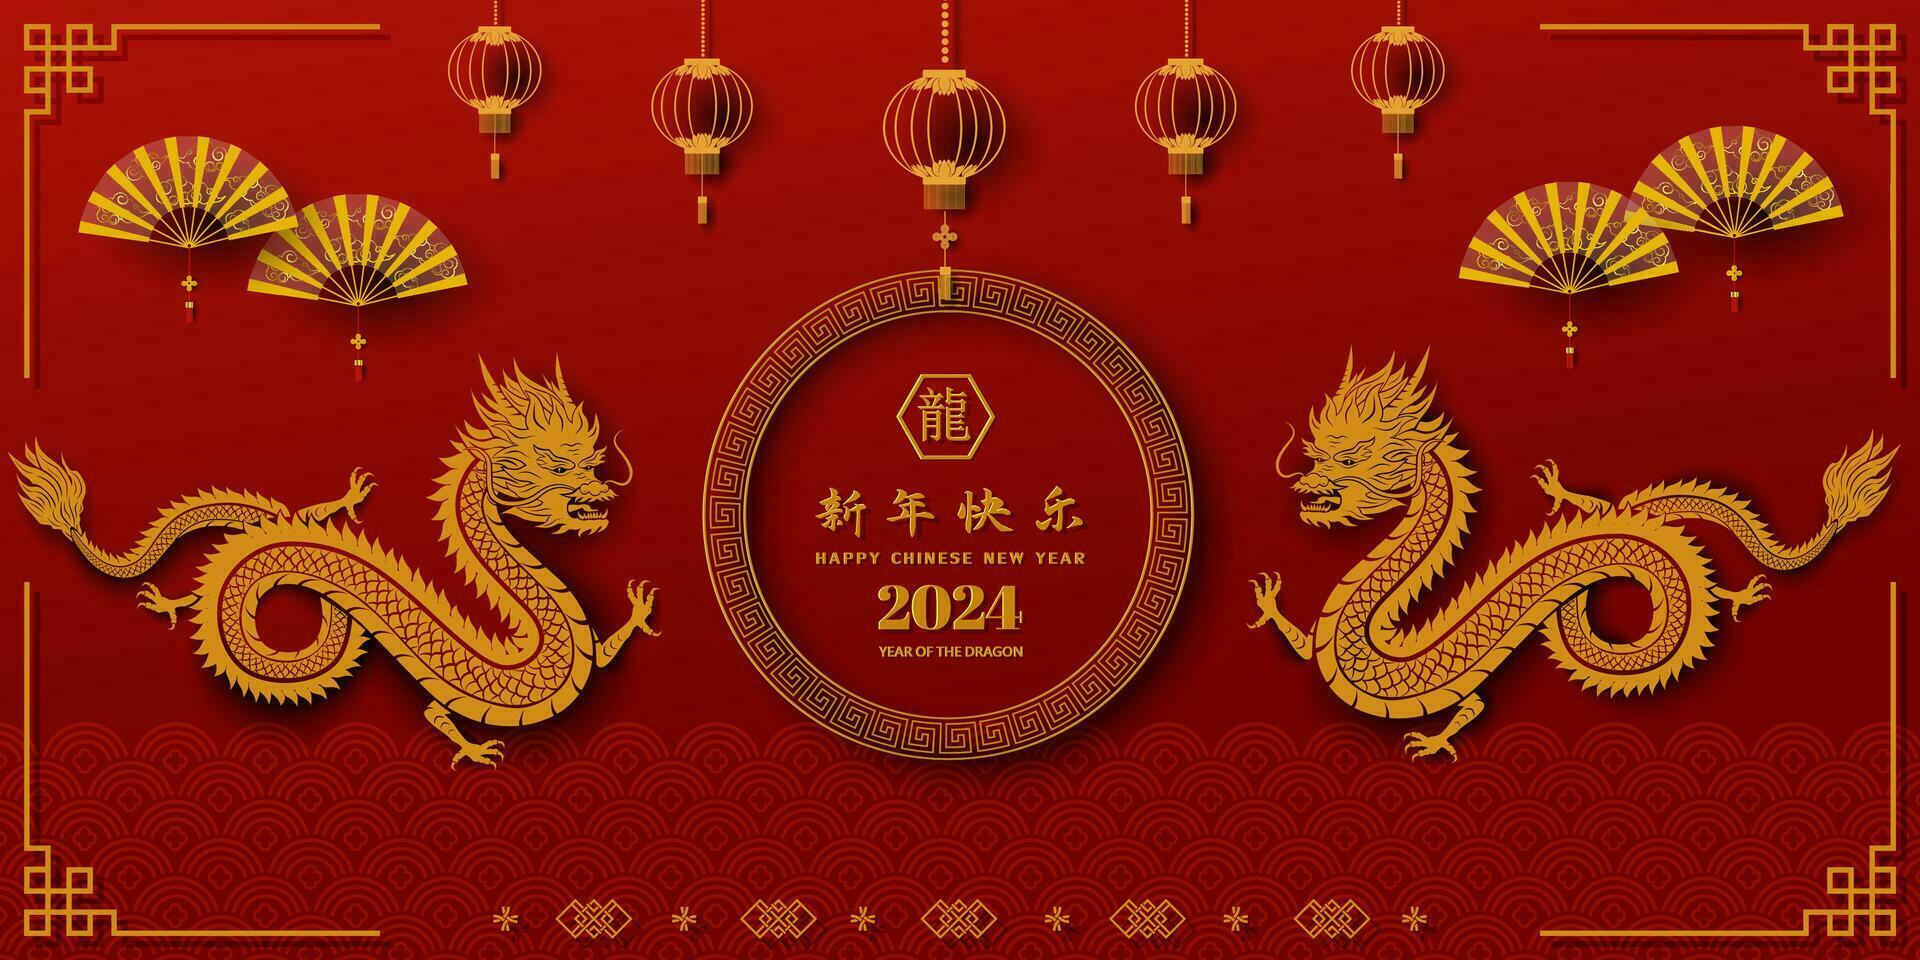 Happy Chinese new year 2024,dragon zodiac sign with asian elements on horizontal background,Chinese translate mean happy new year 2024,year of the dragon vector